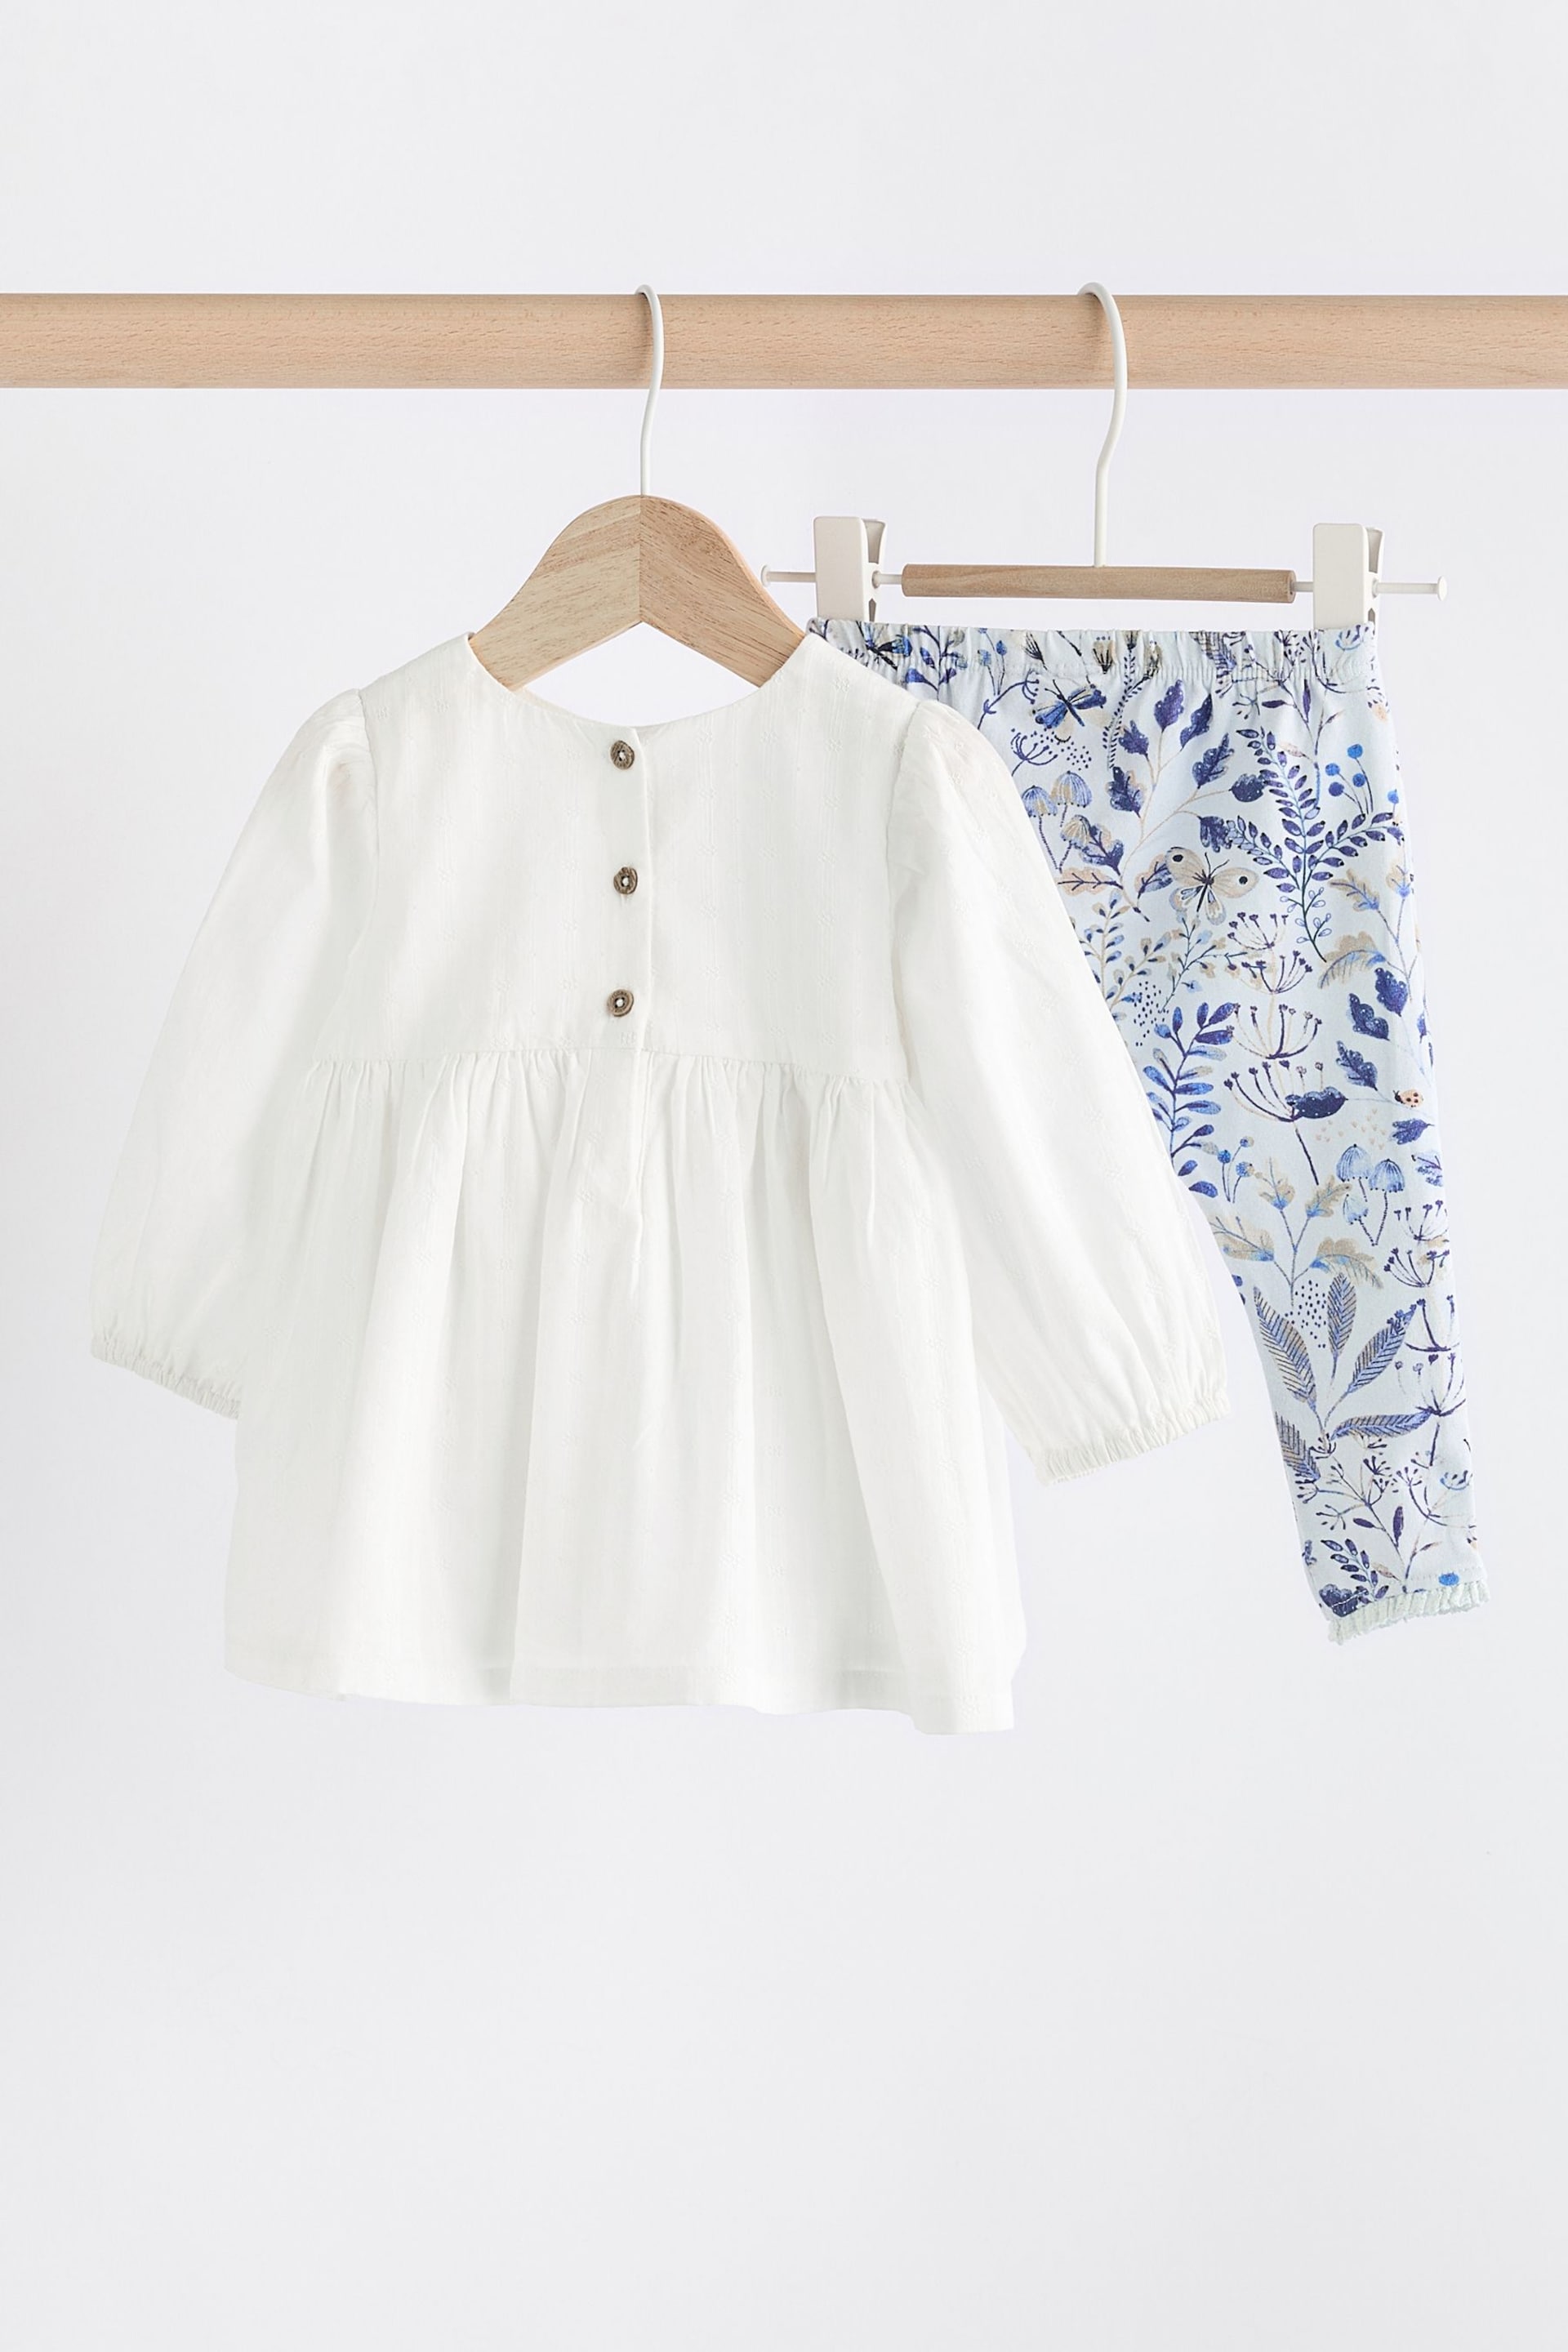 White/Blue Embroidered 2 Piece Baby Woven Blouse & Leggings Set - Image 4 of 12